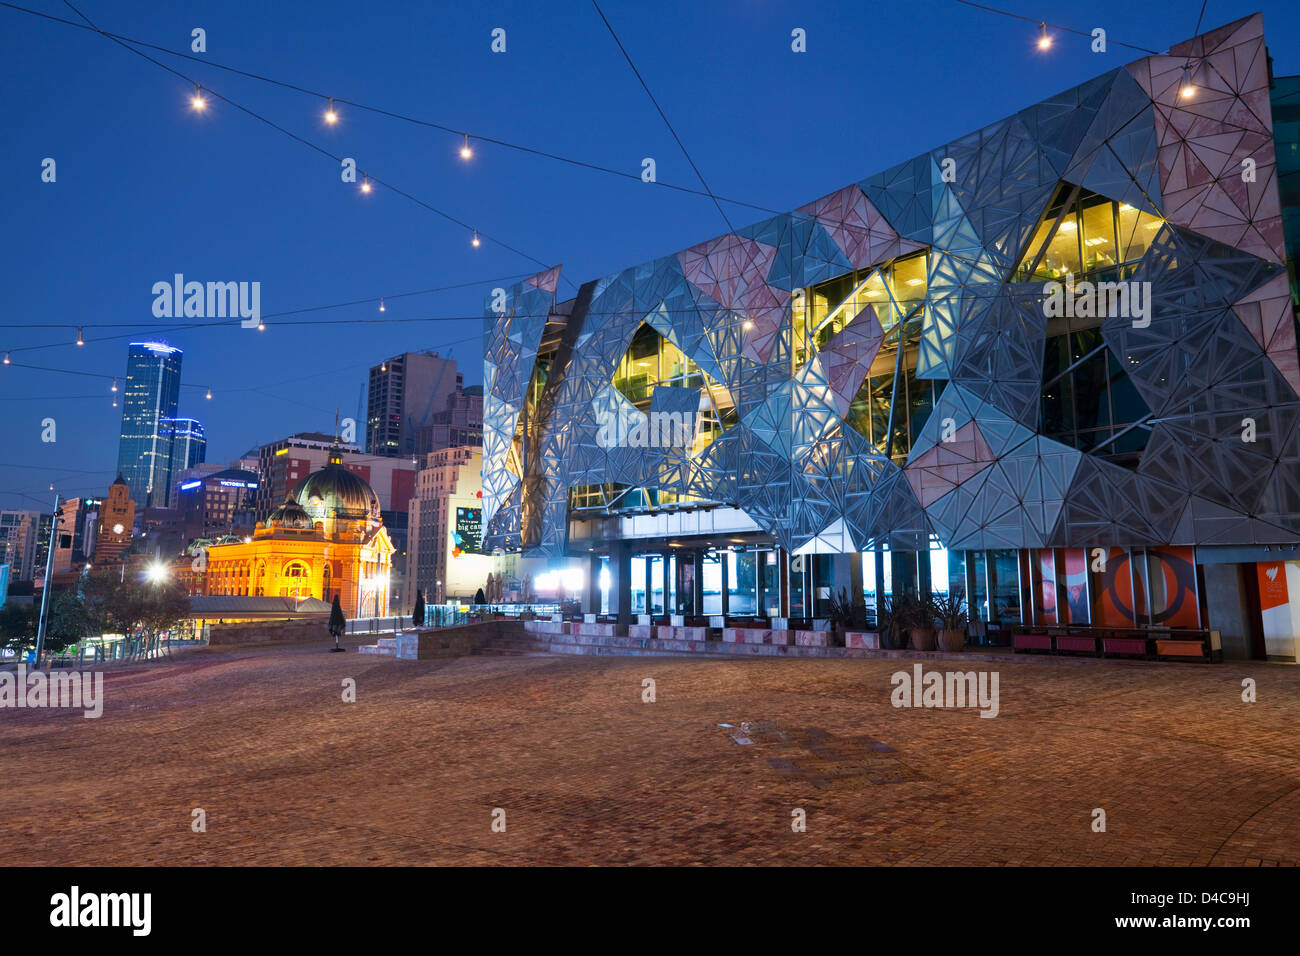 Federation Square illuminated at night with Flinders Street station in background. Melbourne, Victoria, Australia Stock Photo